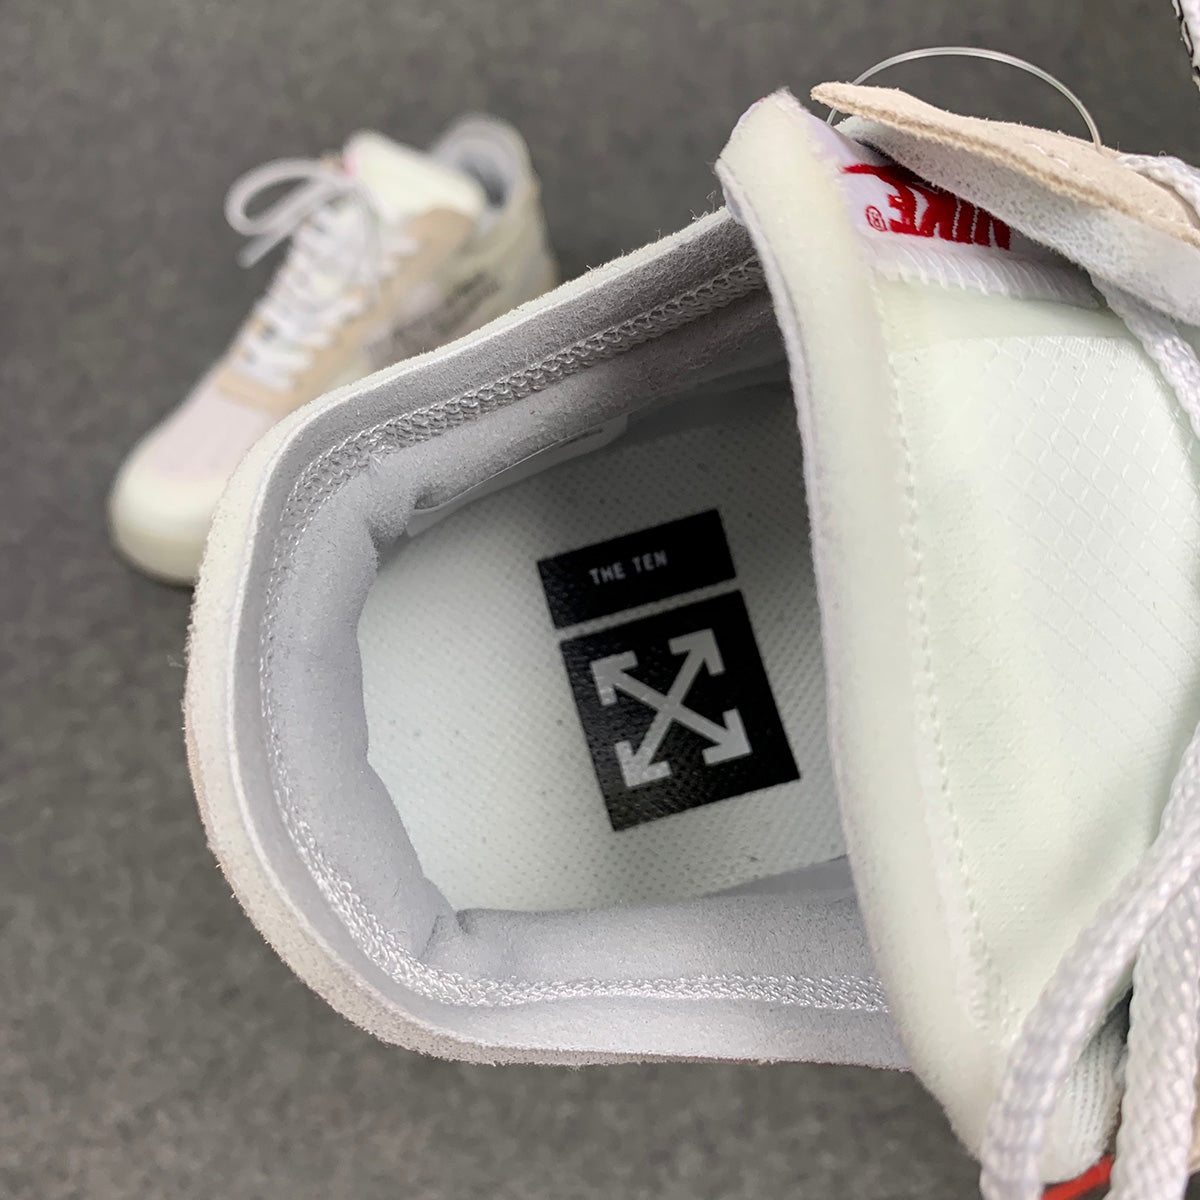 Off-White x Air Force 1 Low 'The Ten'